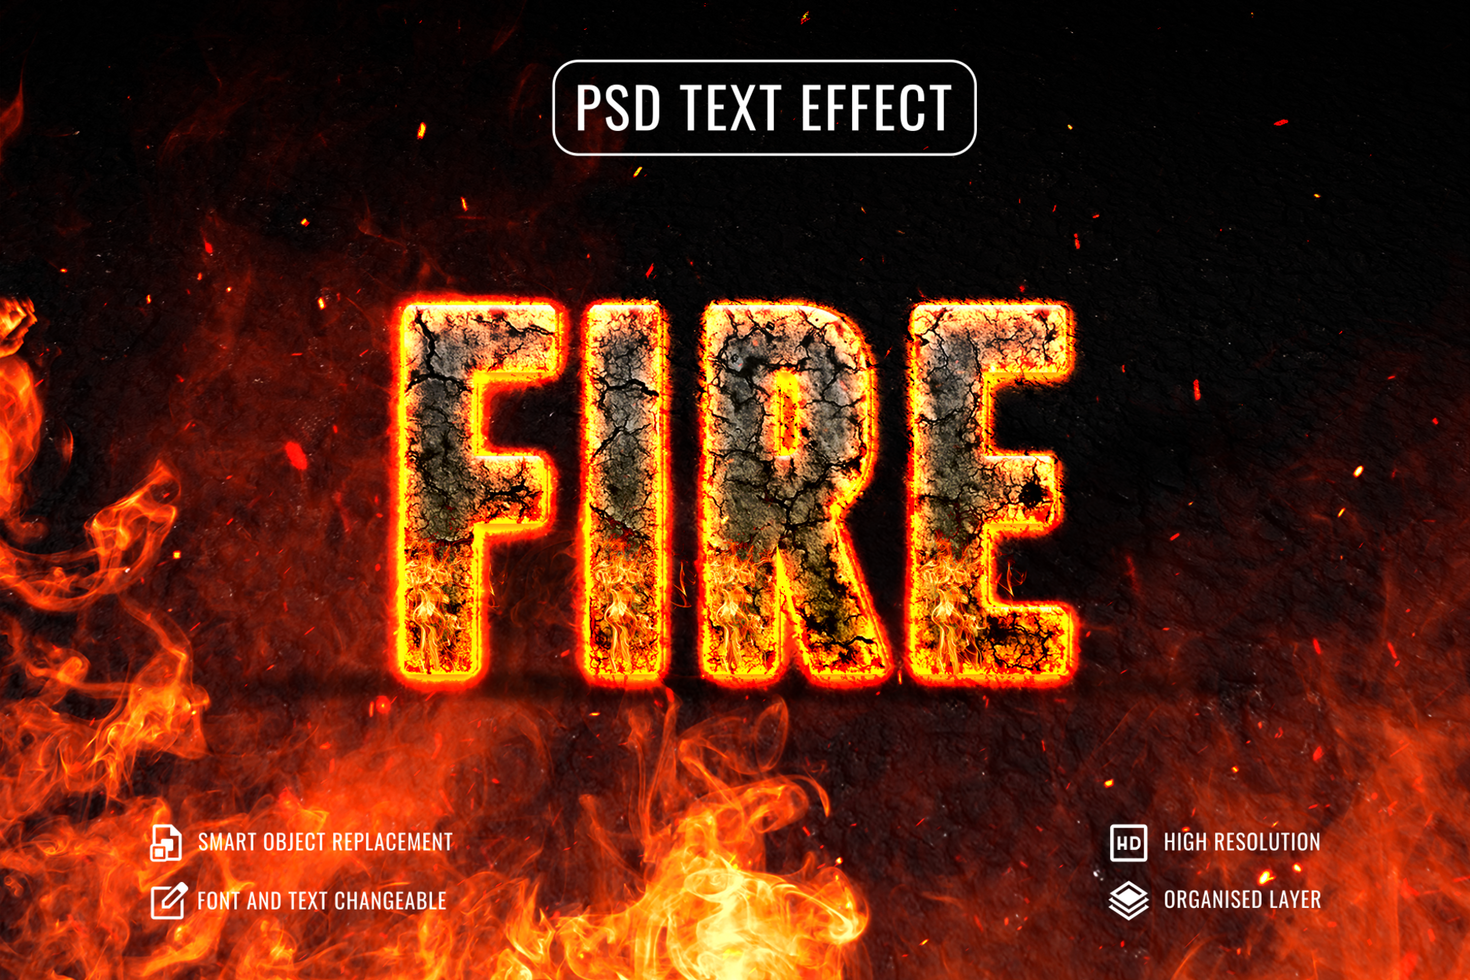 volcano or lava text effect with fire background psd